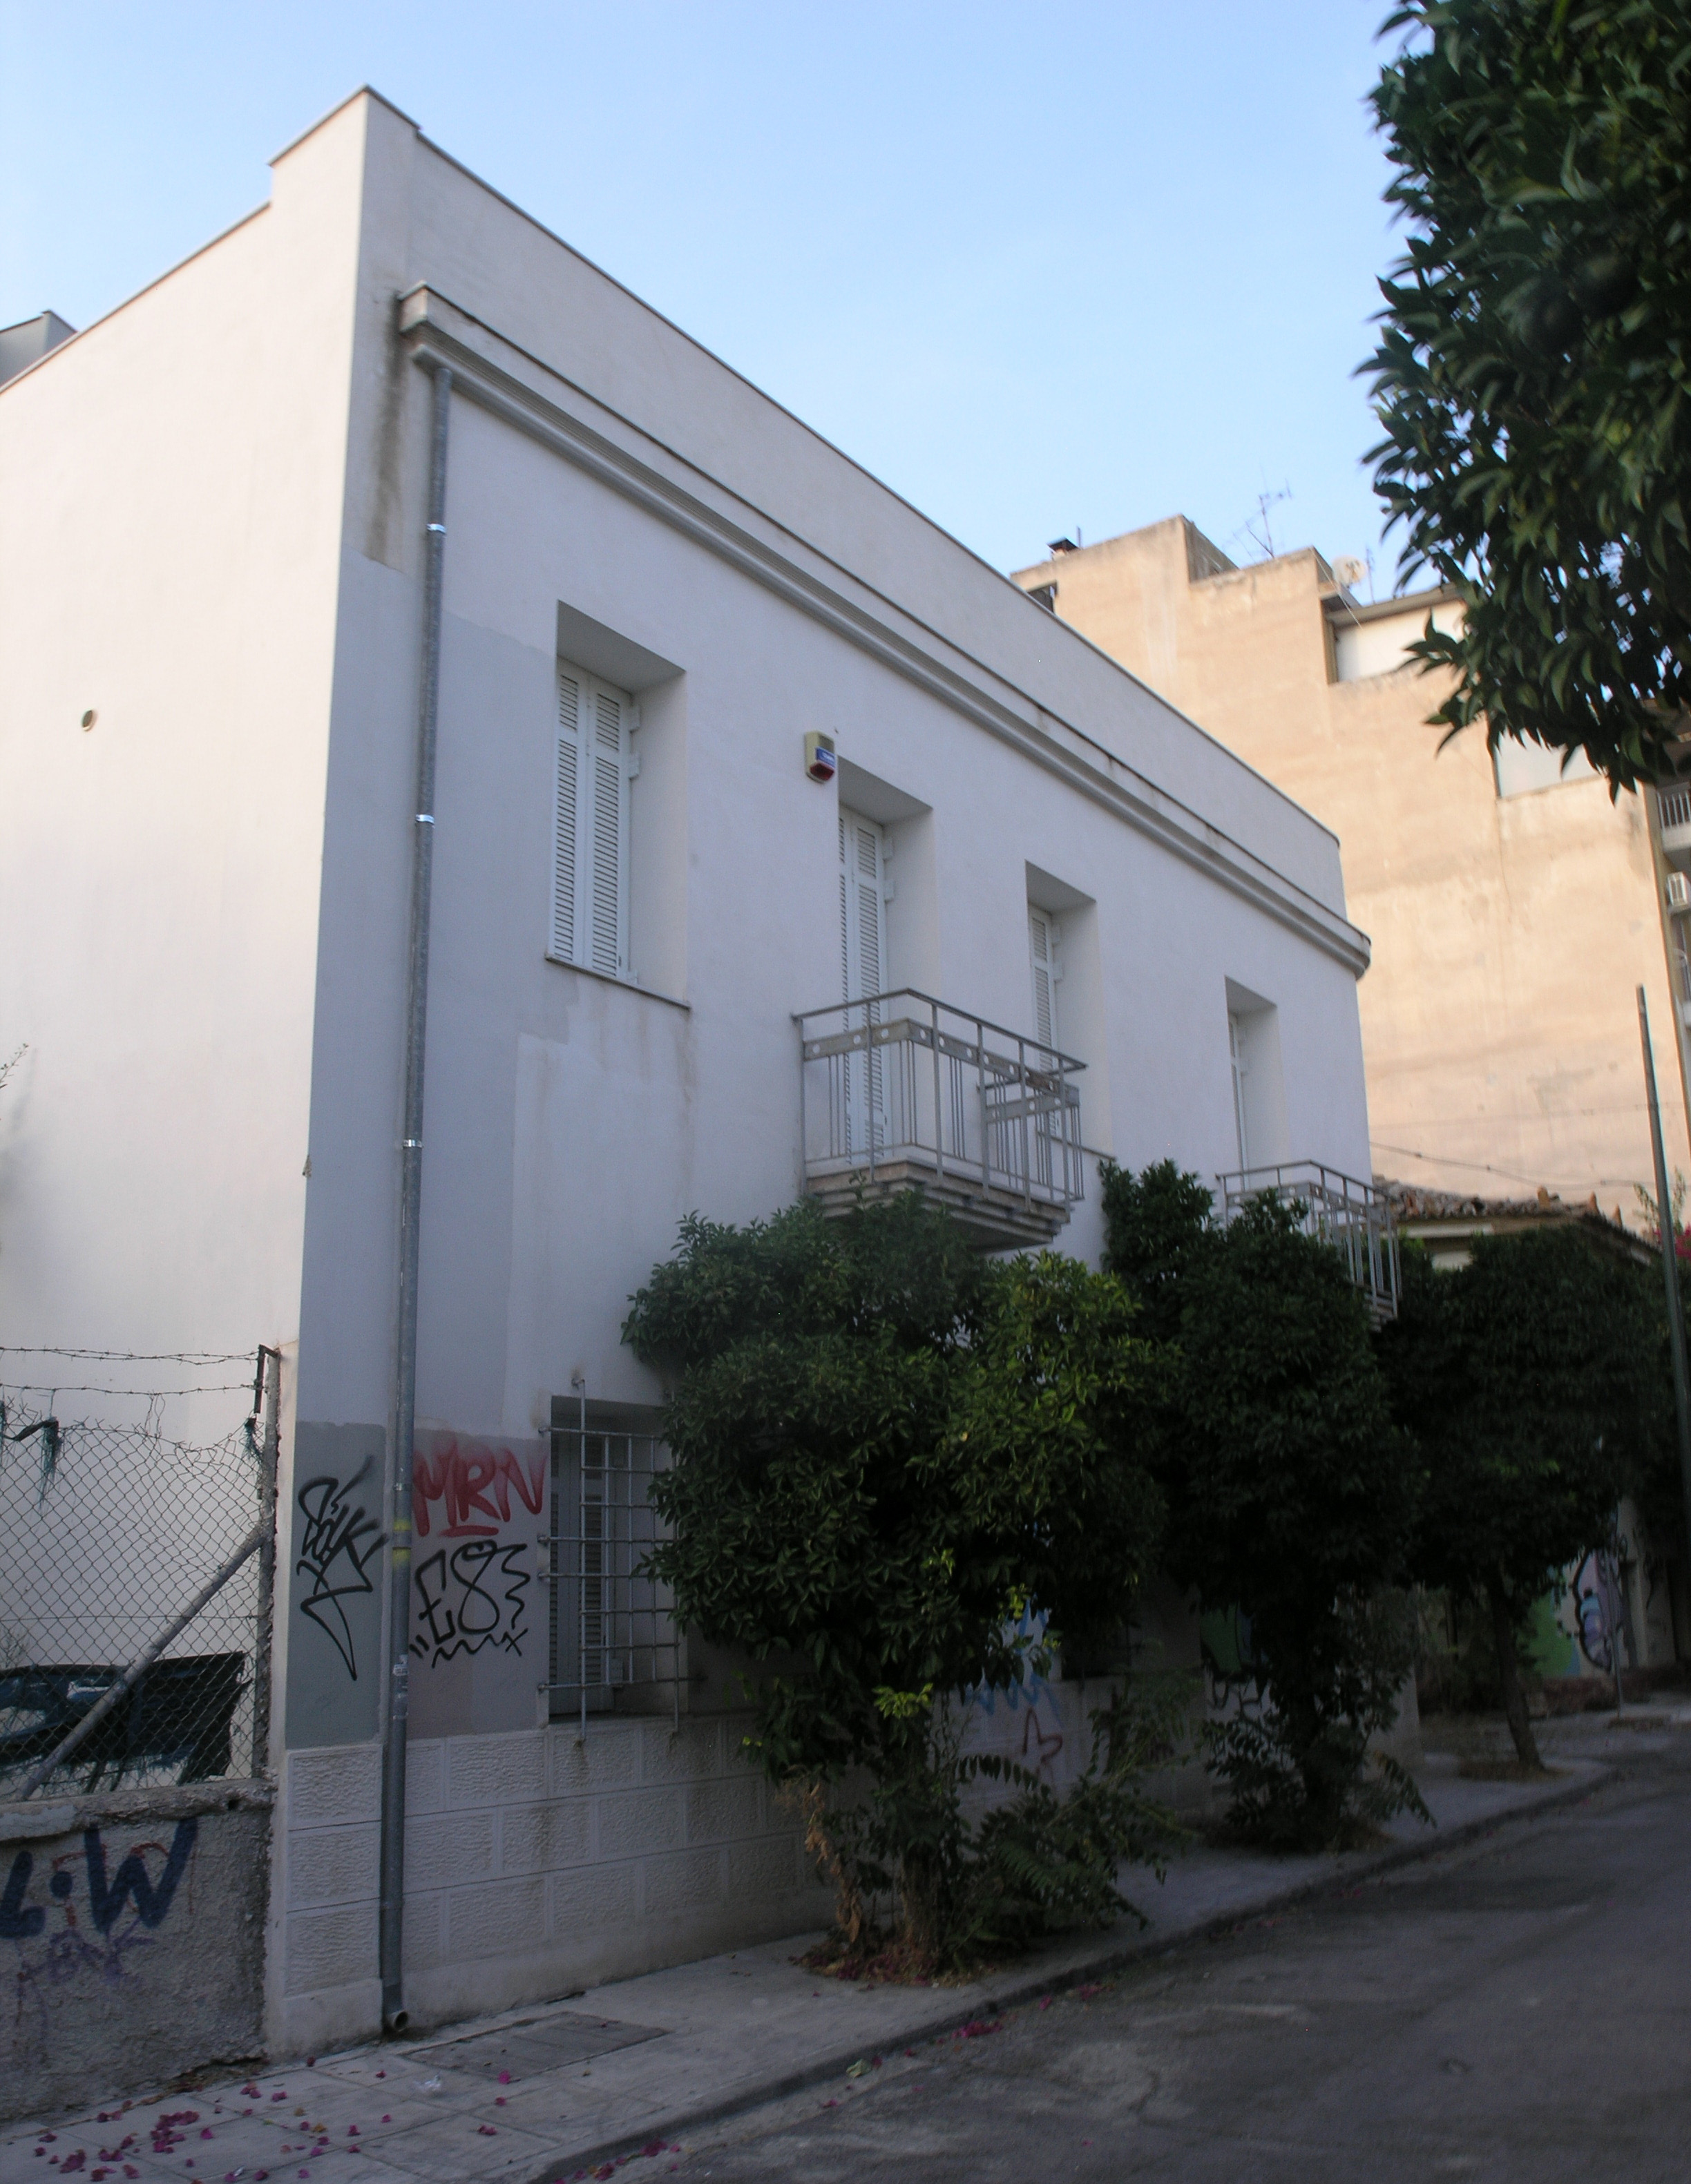 View of the façade on Agisilaou street